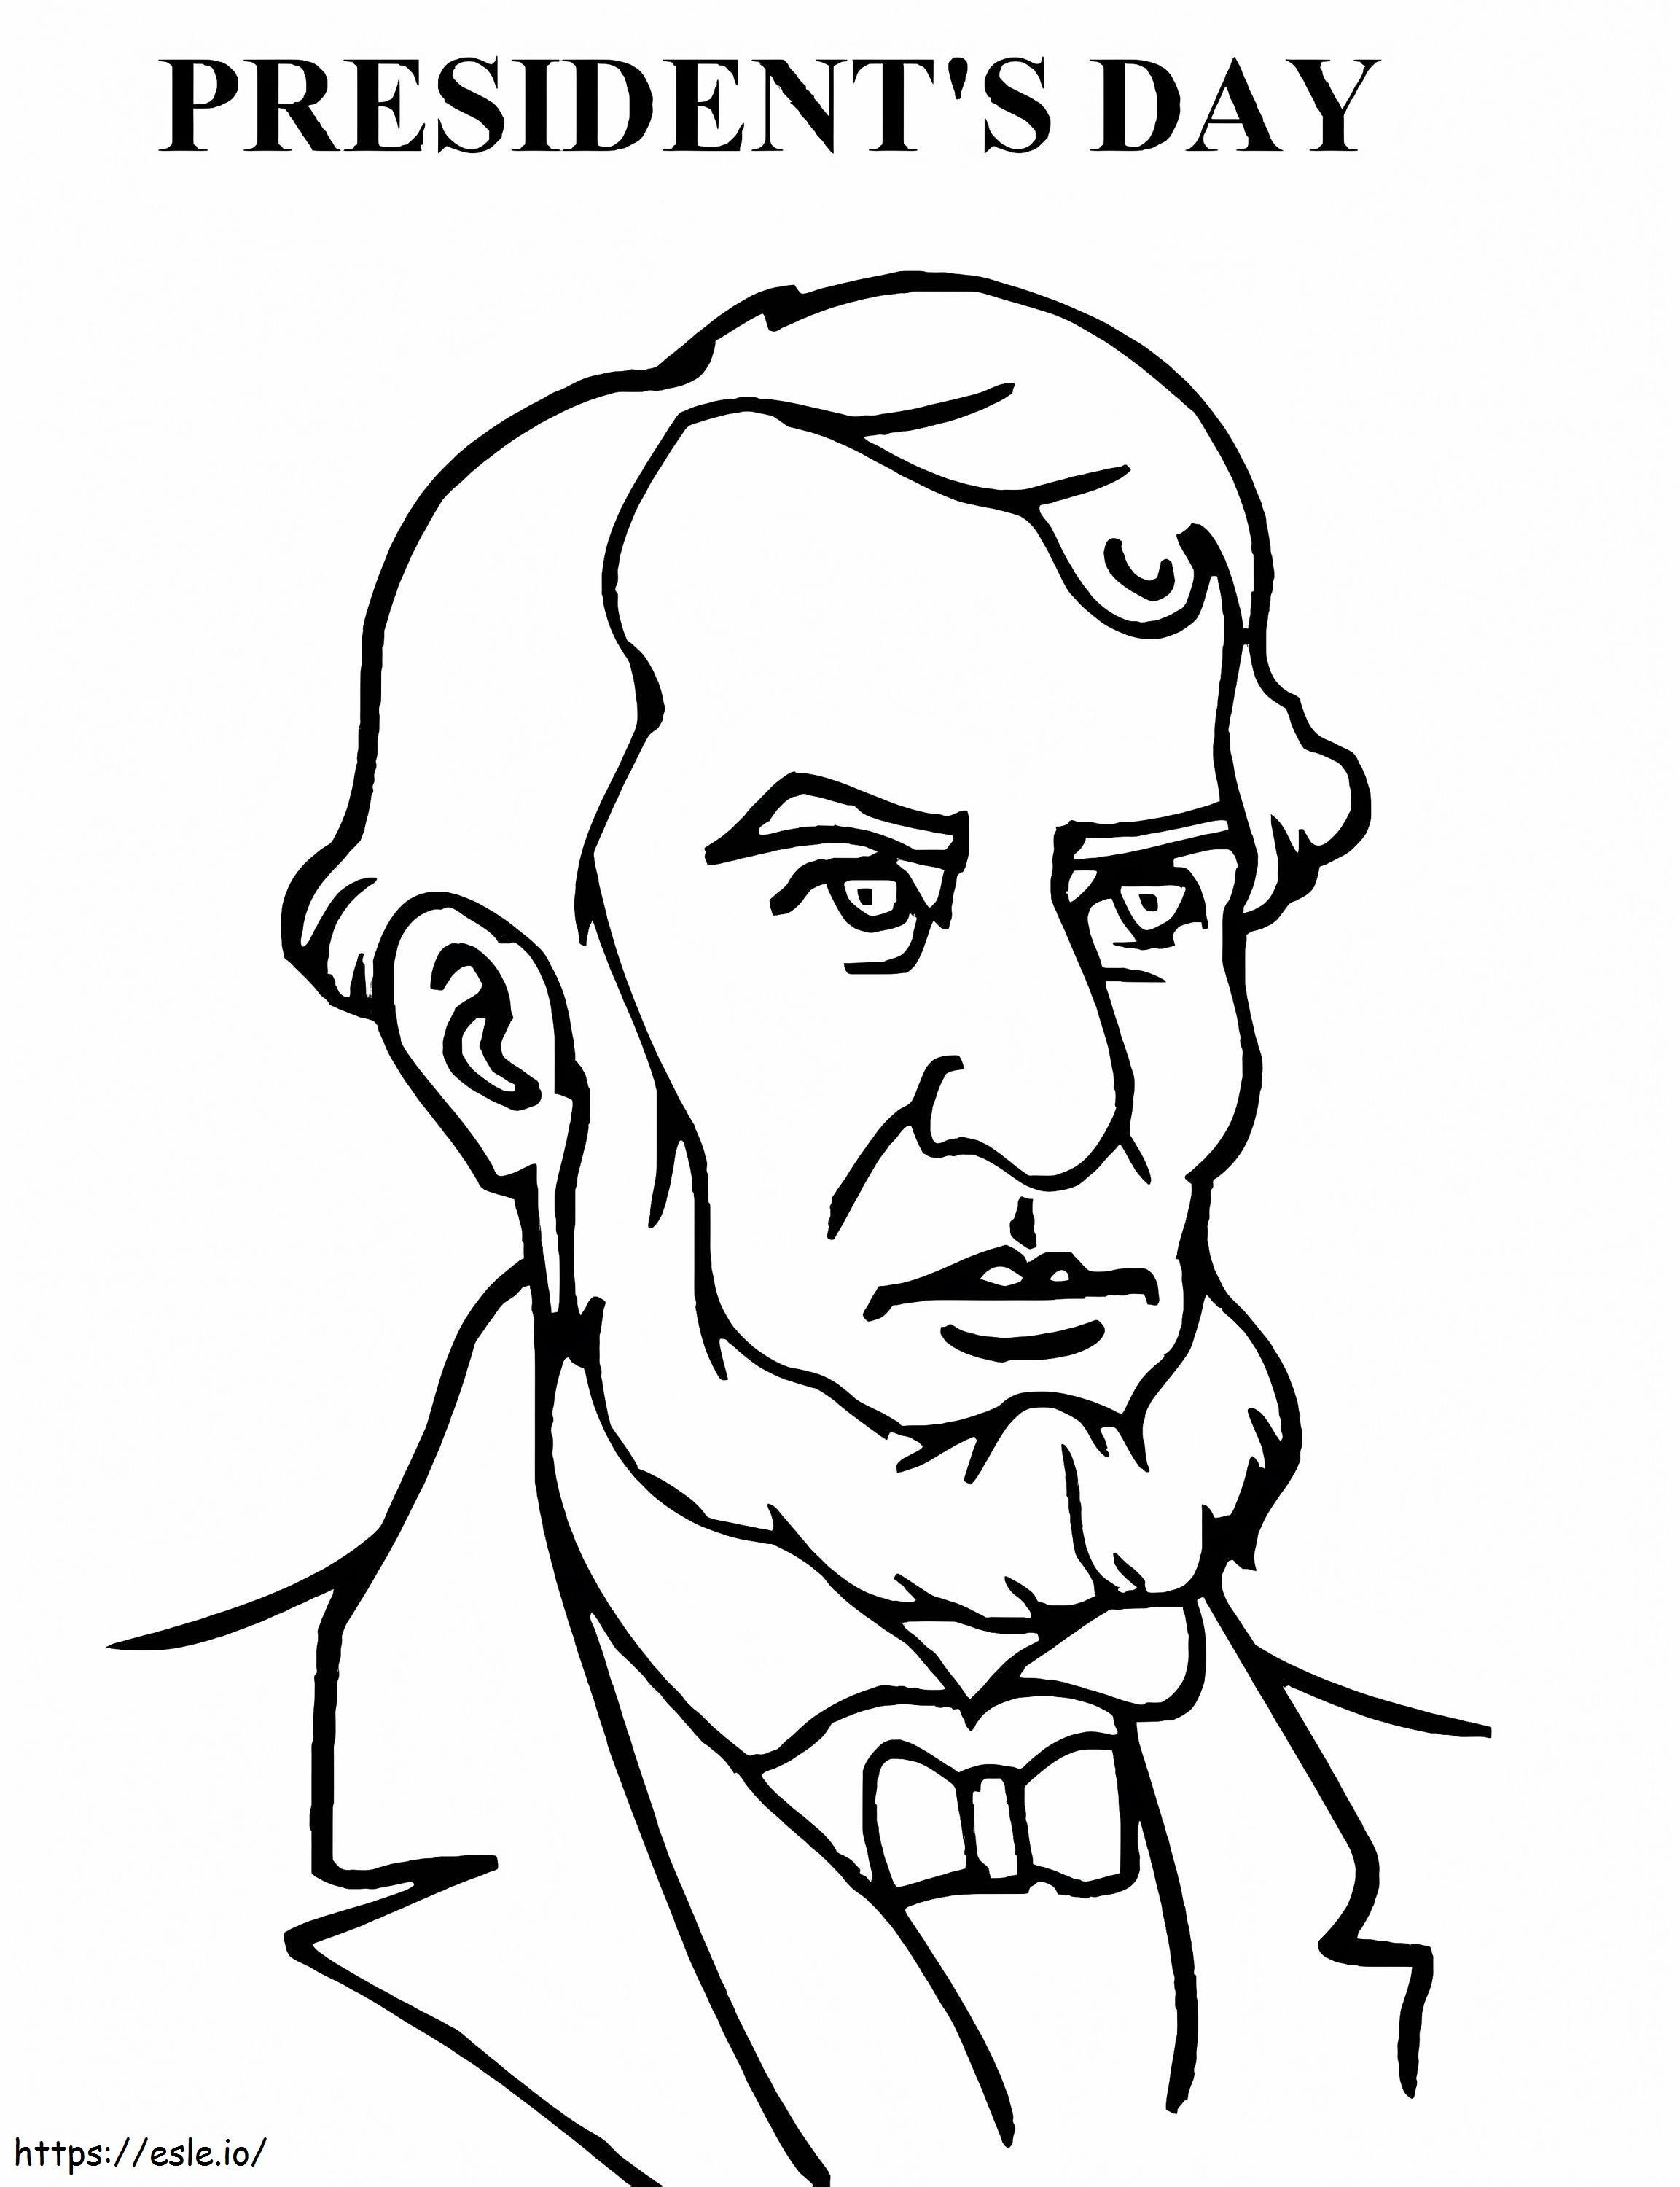 Presidents Day 2 coloring page